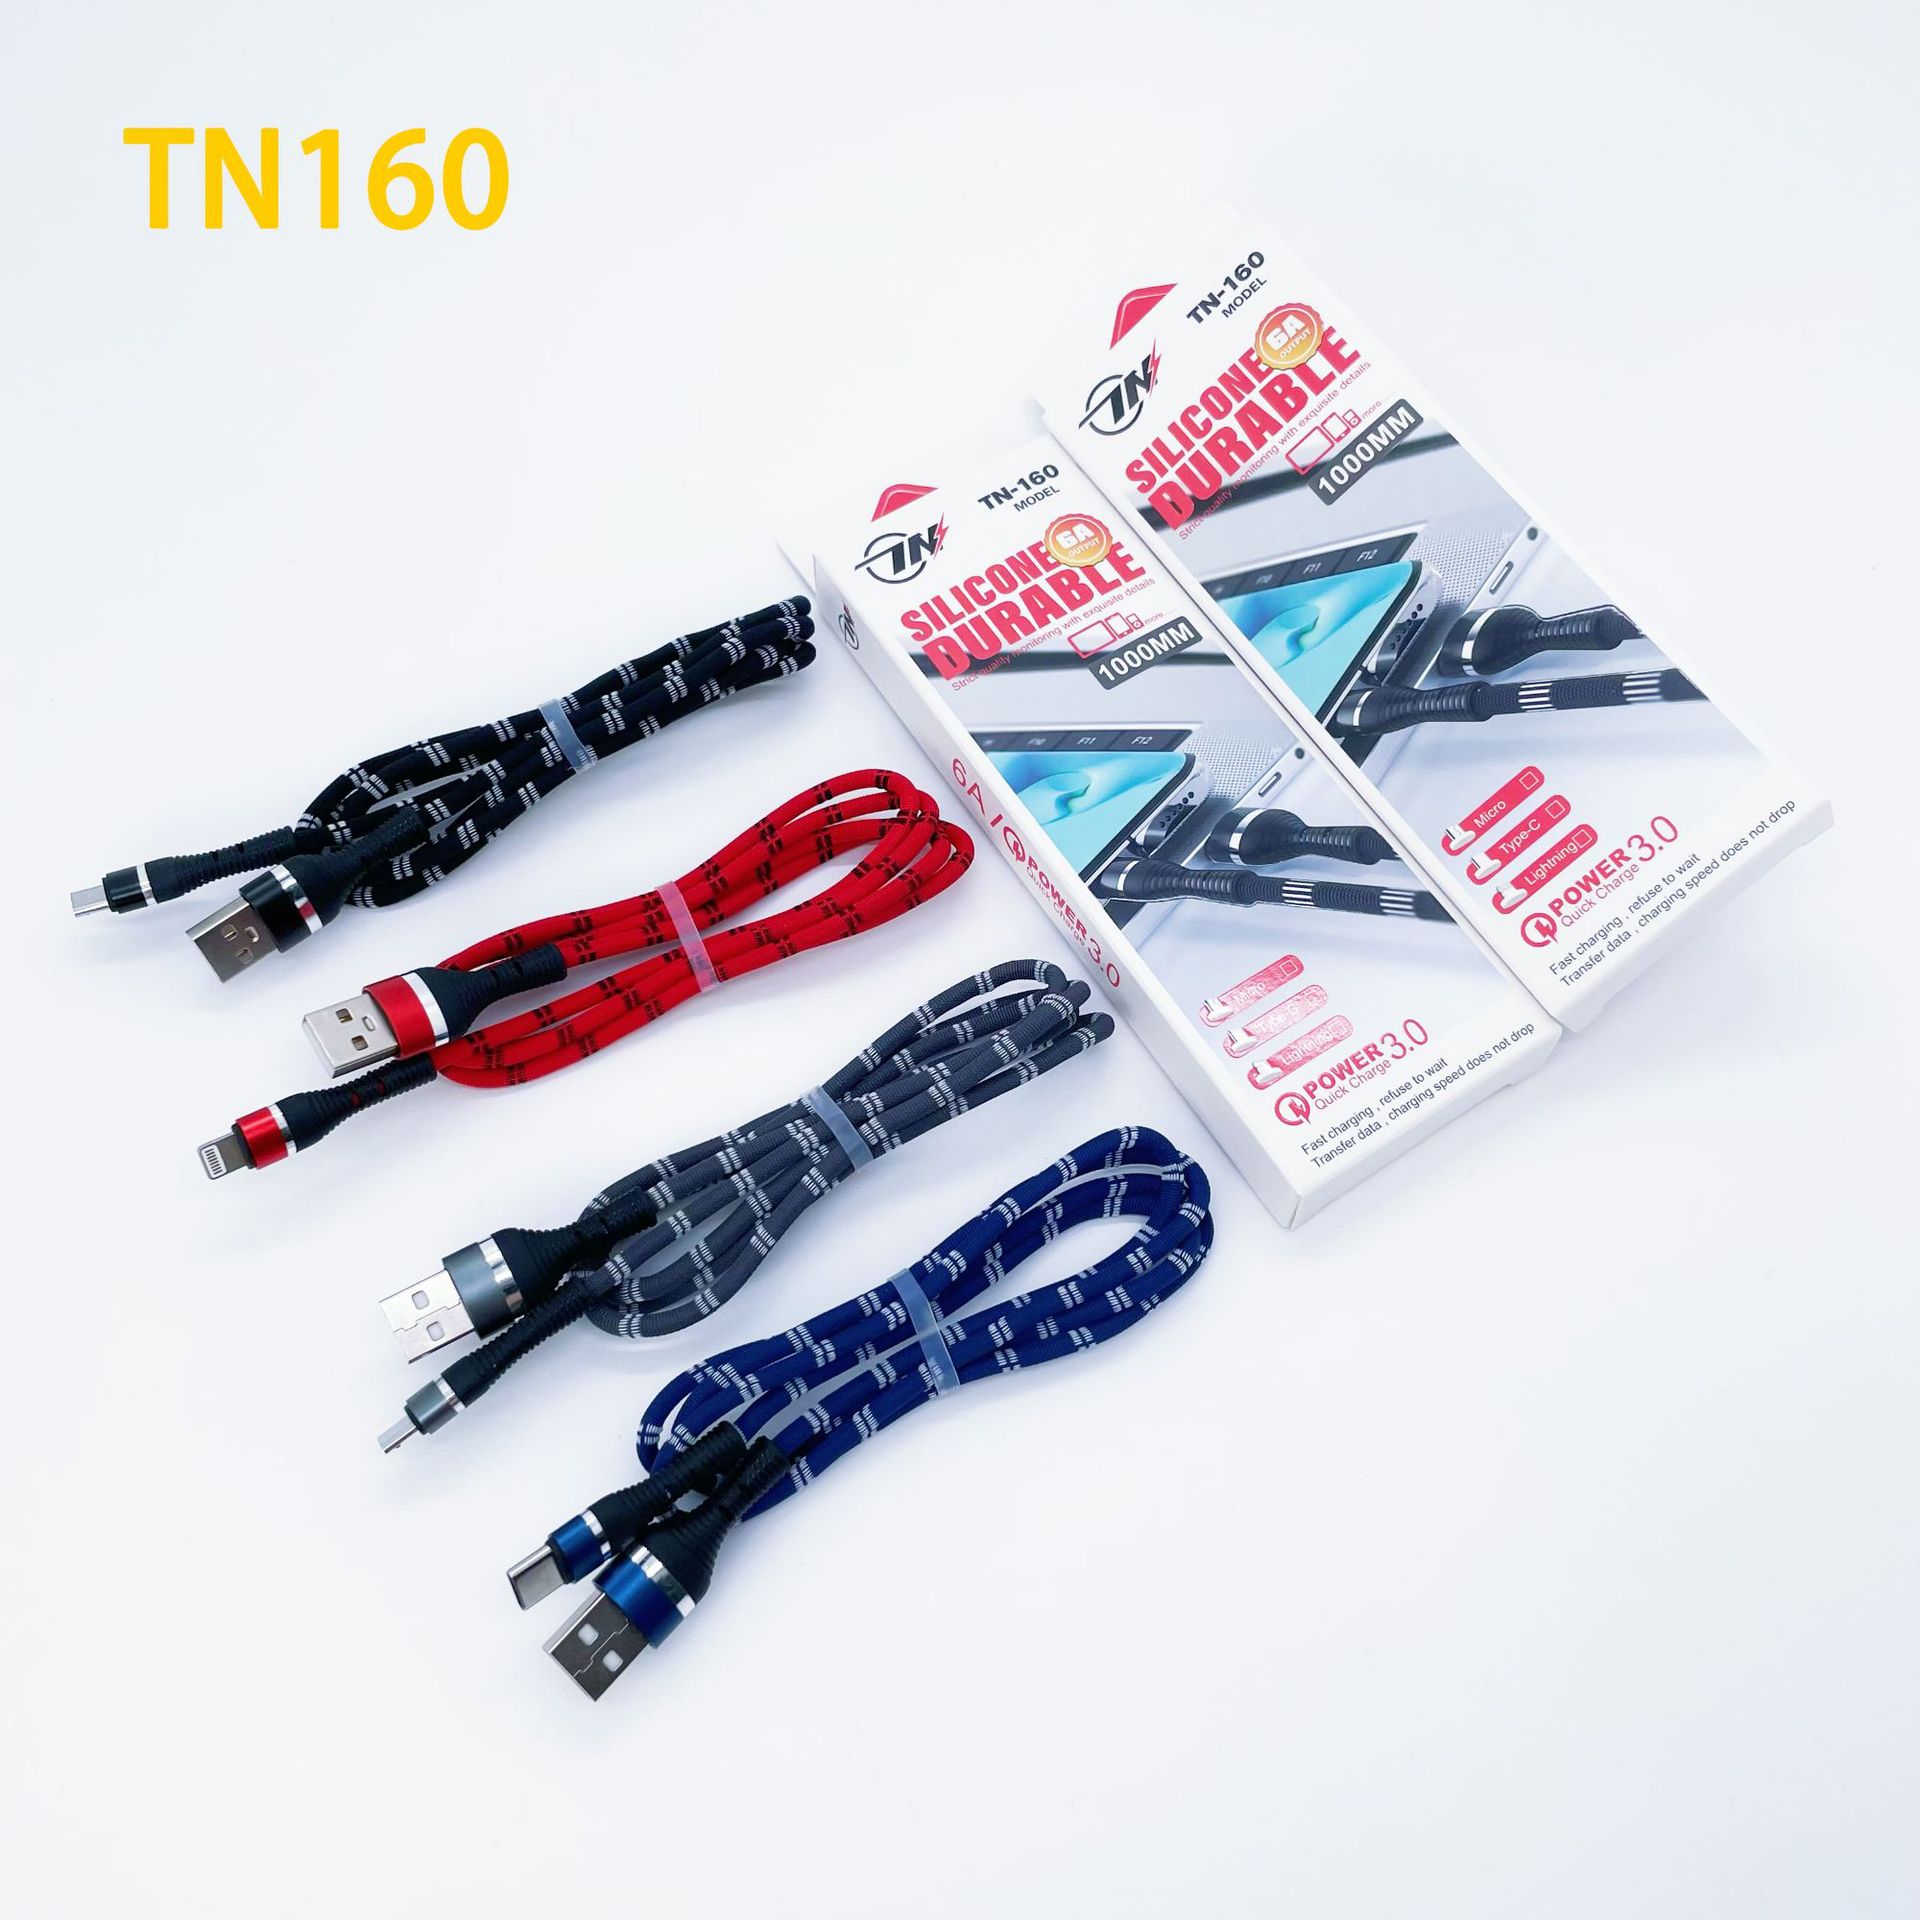 Tn160 New Woven Fast Charge Data Cable I5 Android TC Smartphone Qc3.0 Fast Charge Function Delivery Supported